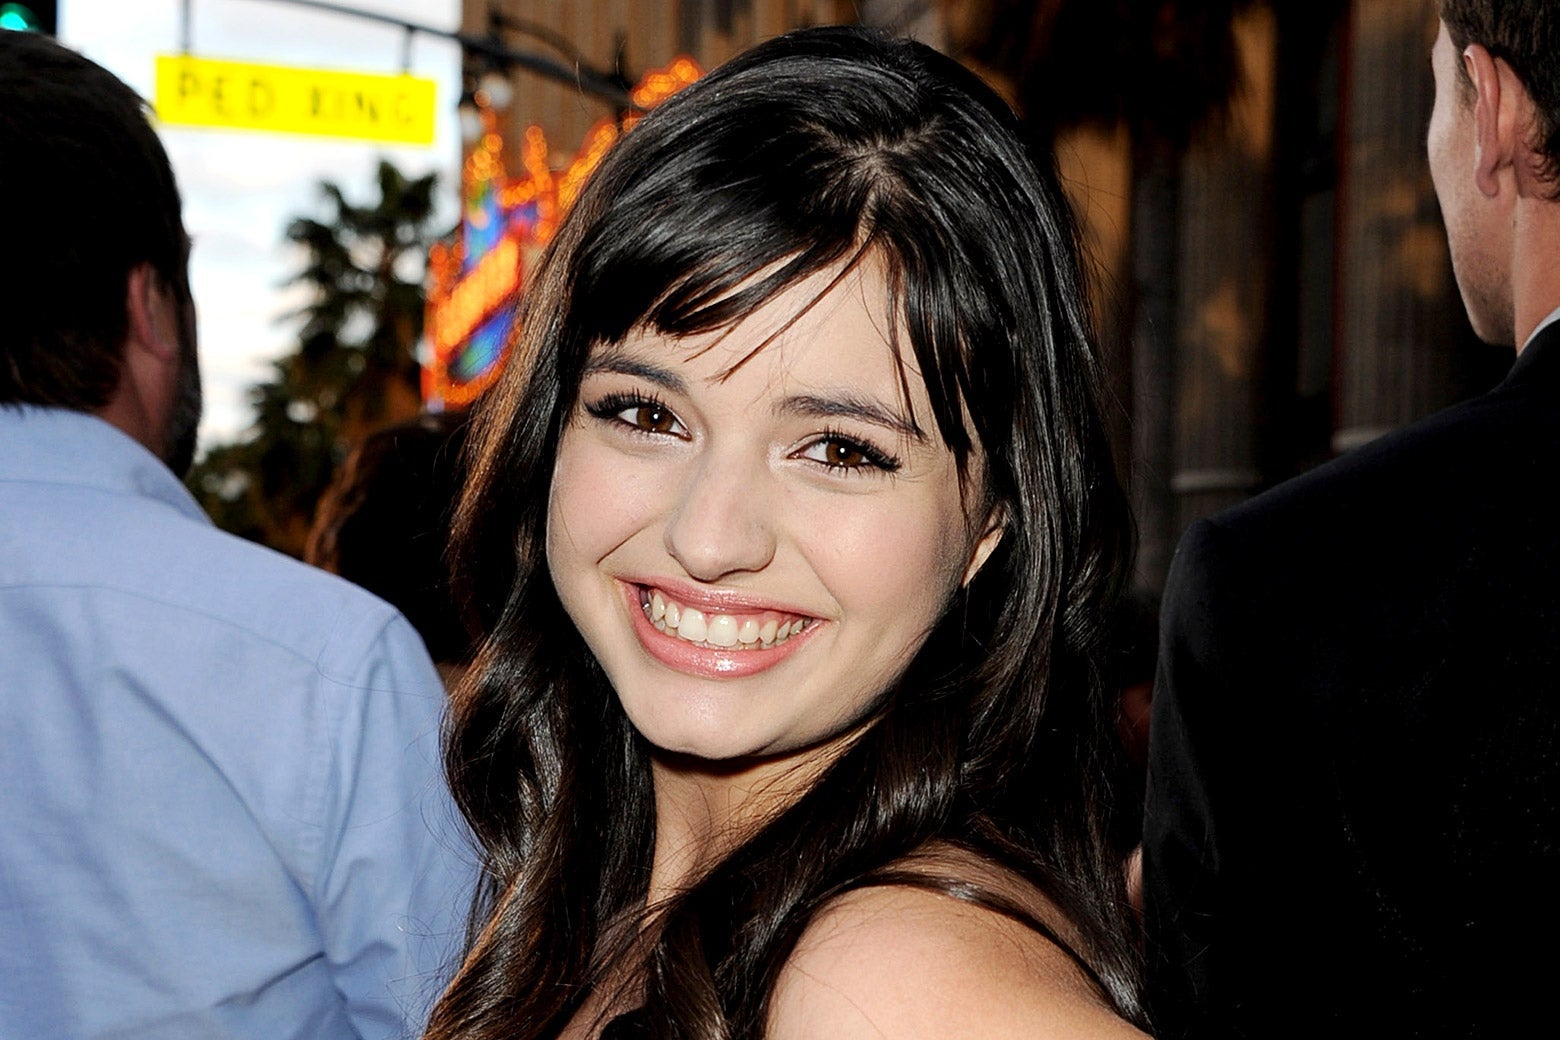 Rebecca Black’s “Friday” Was it really that bad?